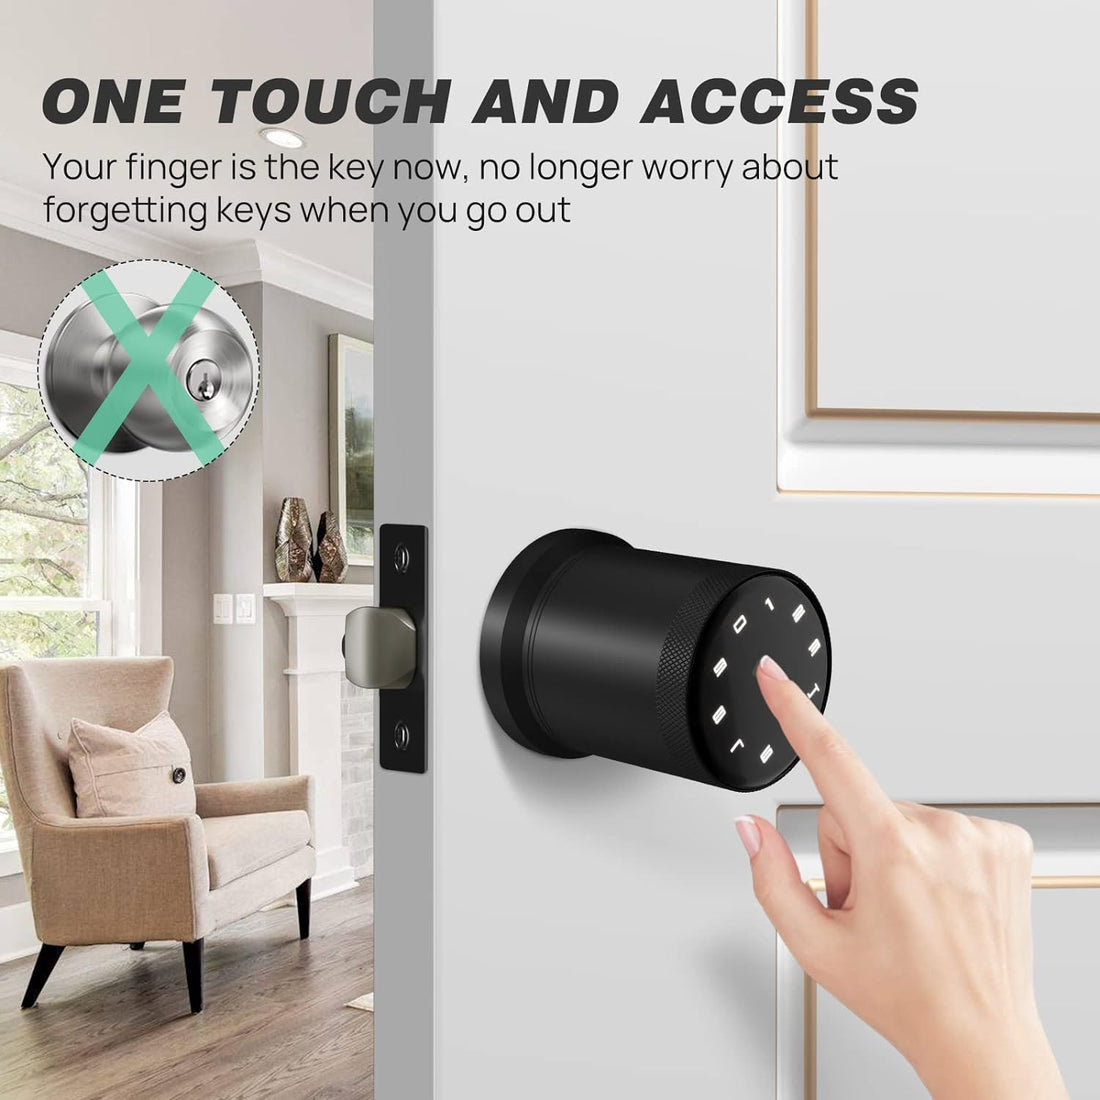 VICMEON Smart Door Knob with LED Keypad and Key, Keyless Entry Door Lock with Voice Function, Smart Door Knob Remote Control with APP for Bedroom Garage Office Hotels (Matte Black)